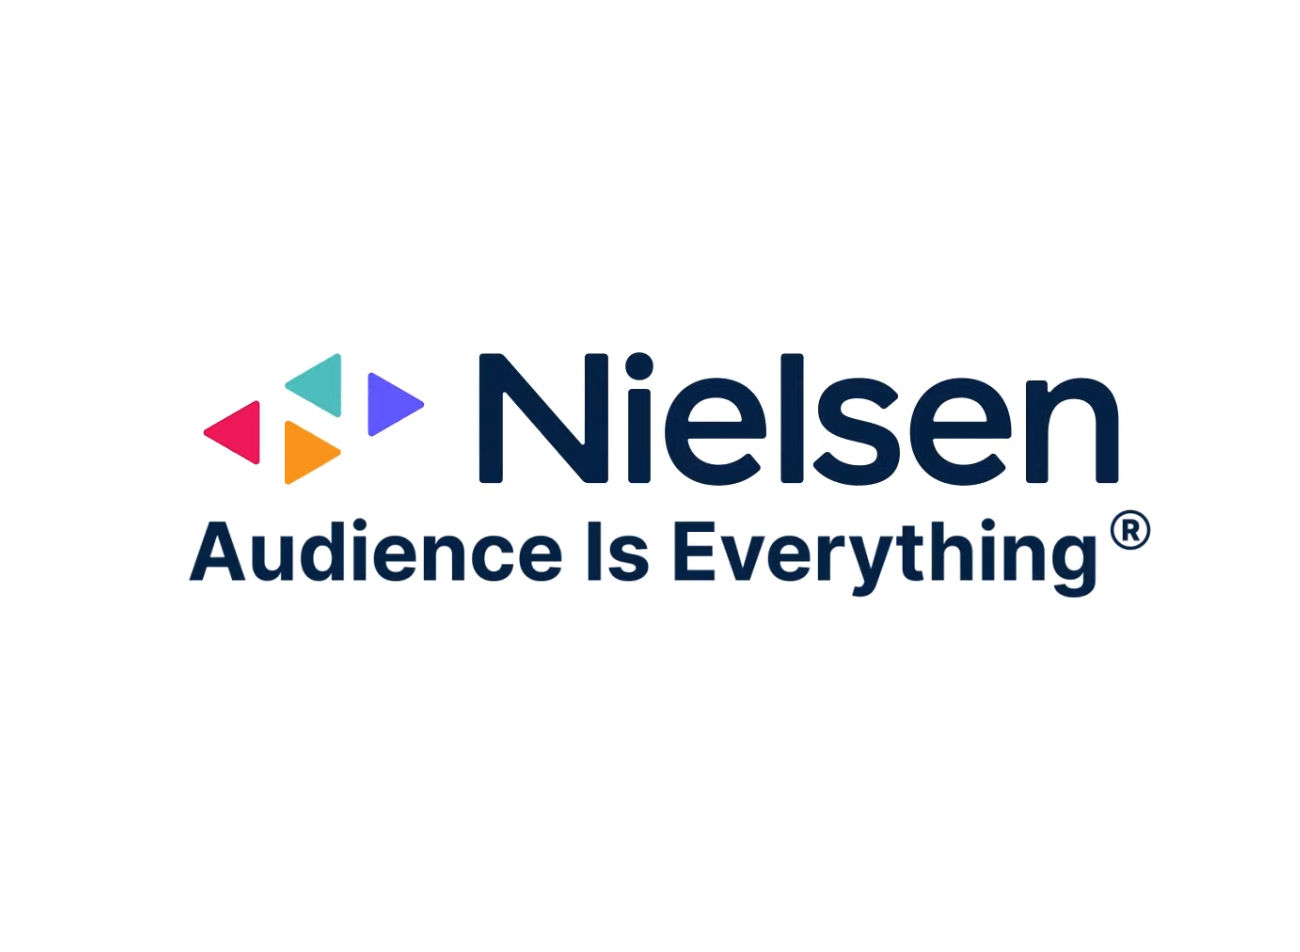 Nielsen – Audience is everything, Quelle: Nielsen